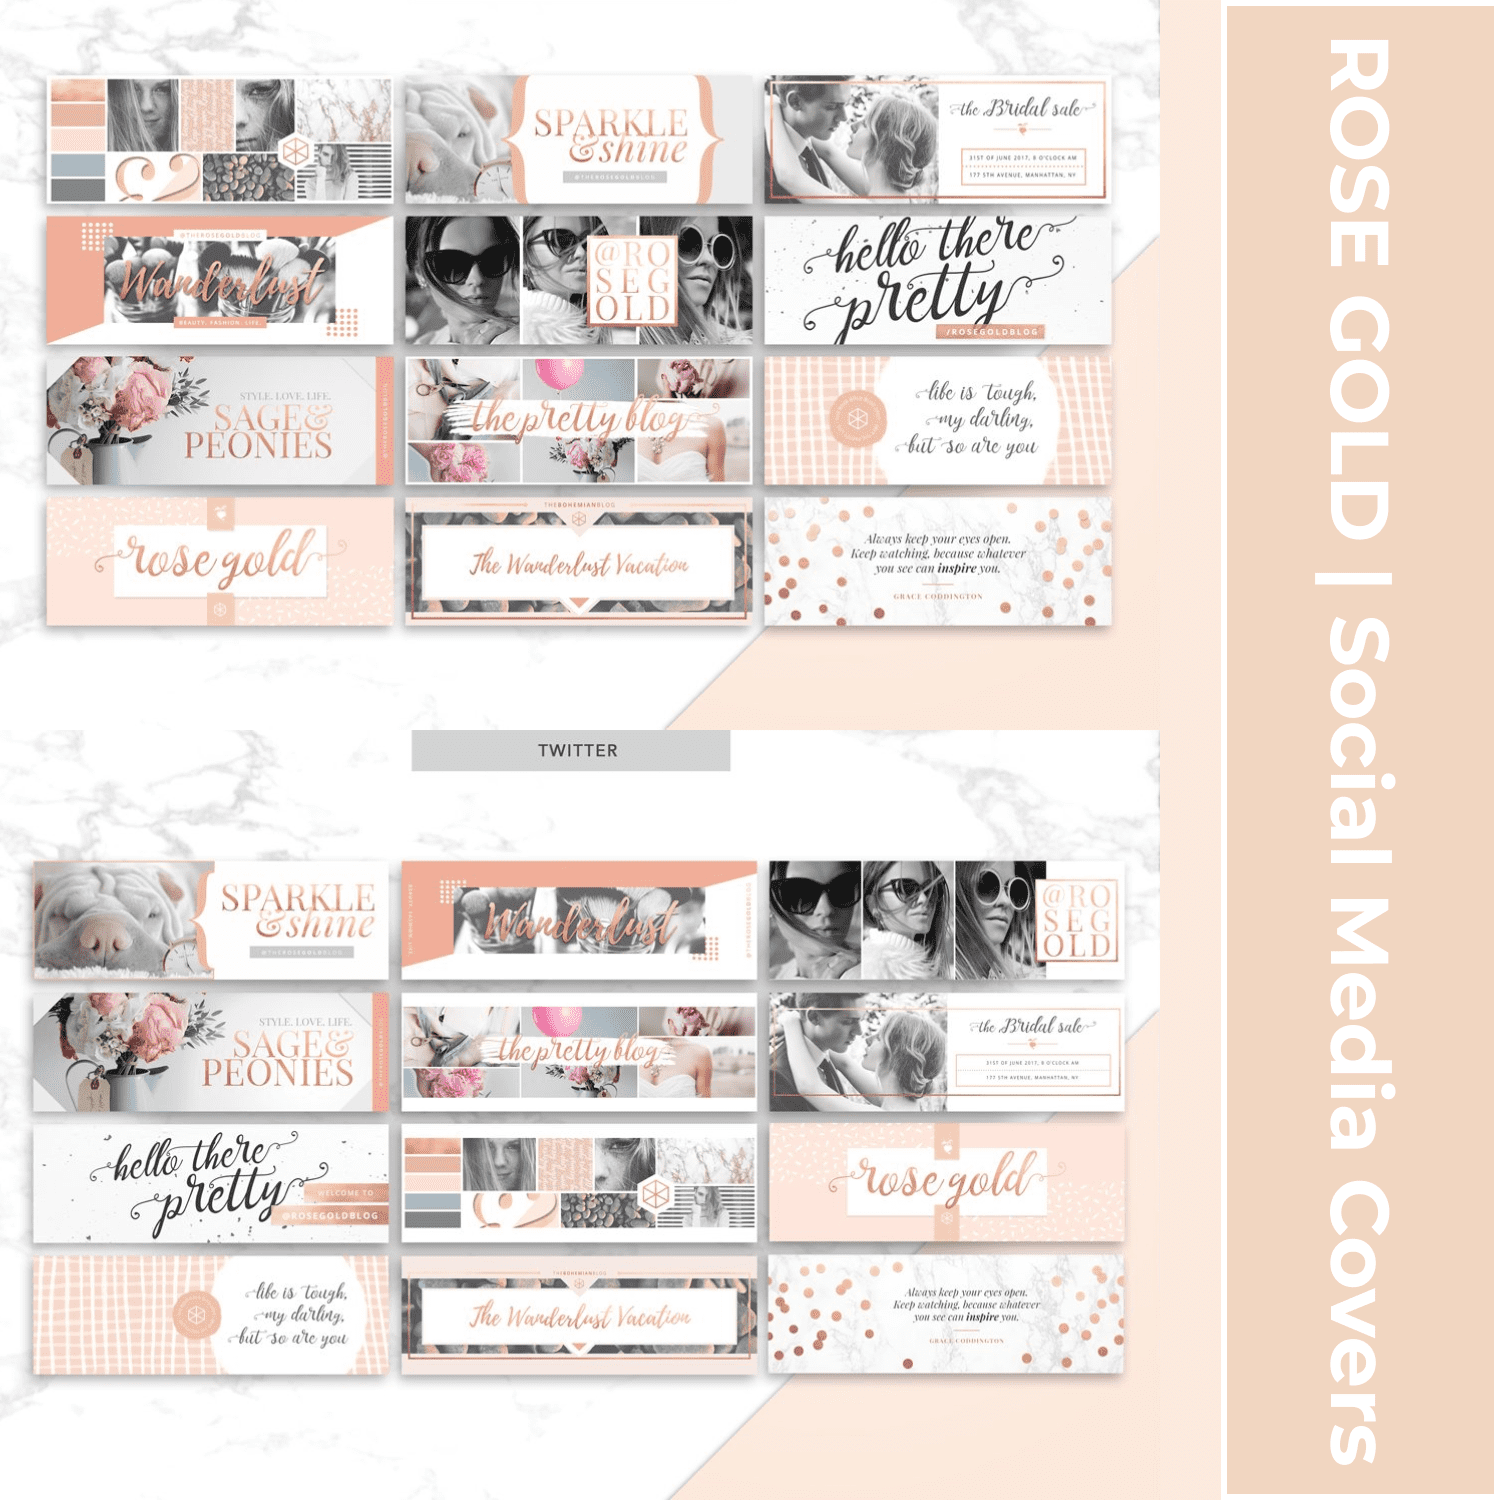 ROSE GOLD | Social Media Covers cover image.